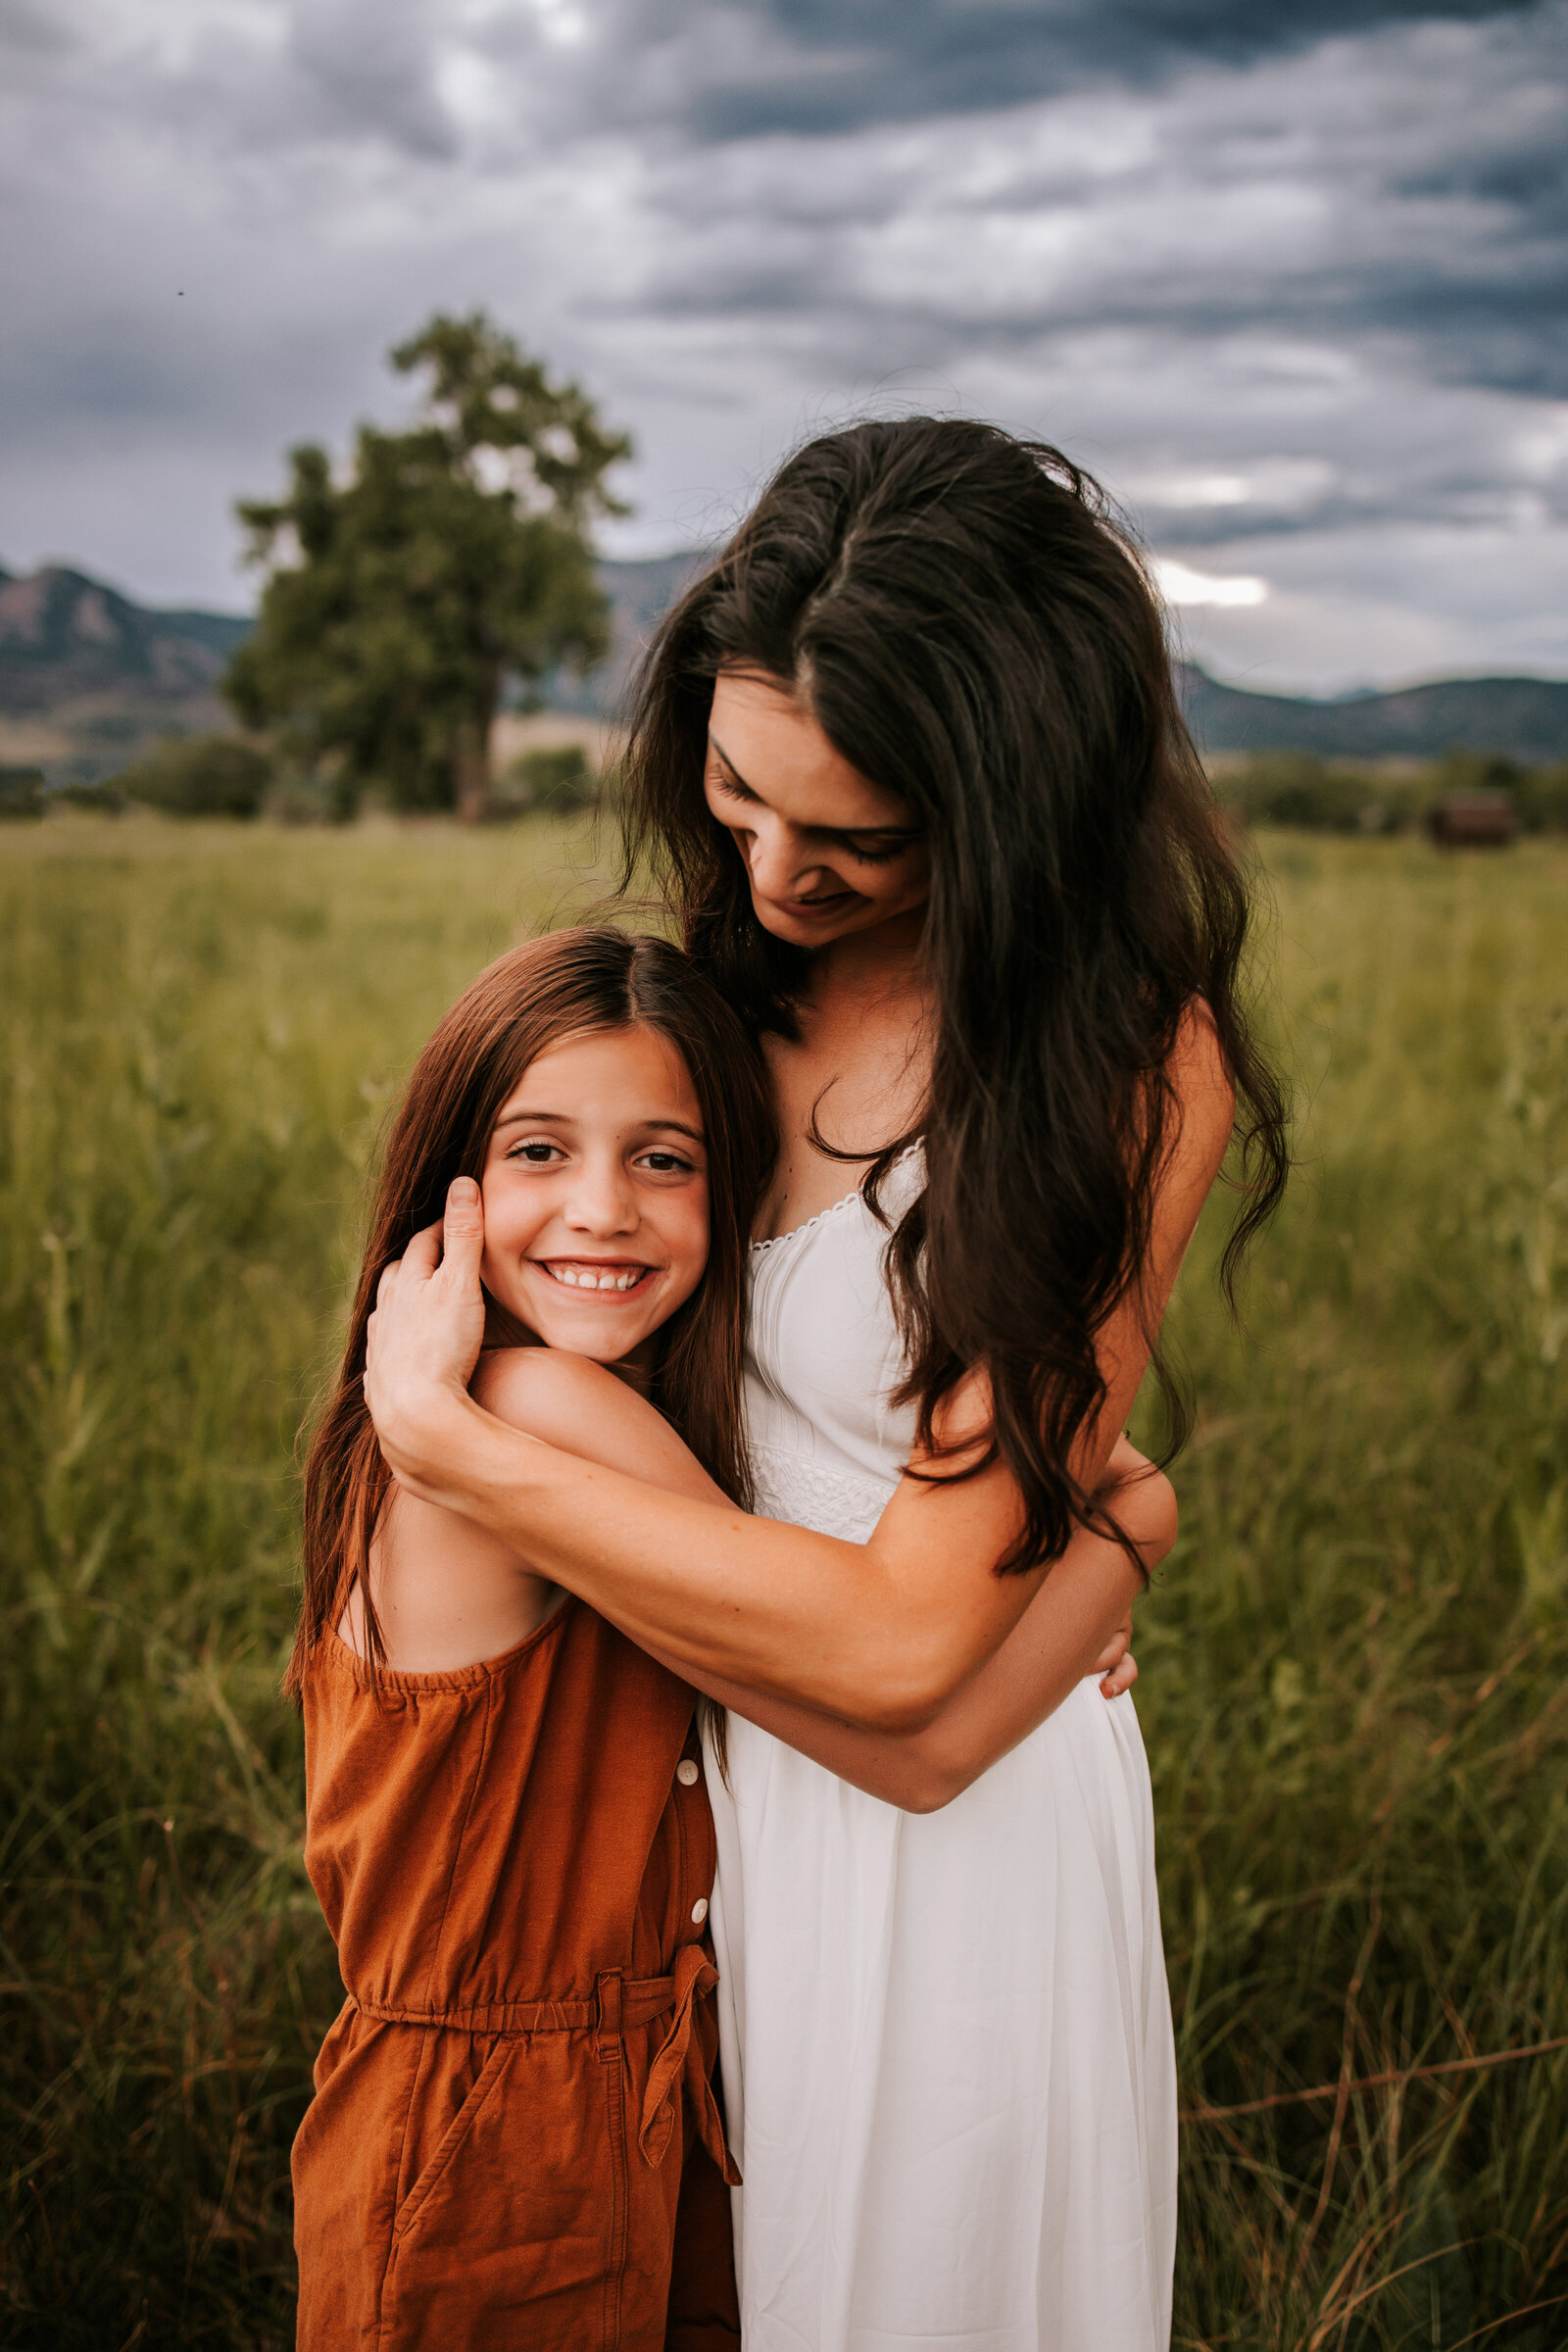 mom hugs young daughter in  the middle of a grassy field while wearing an orange and white dress during golden hour